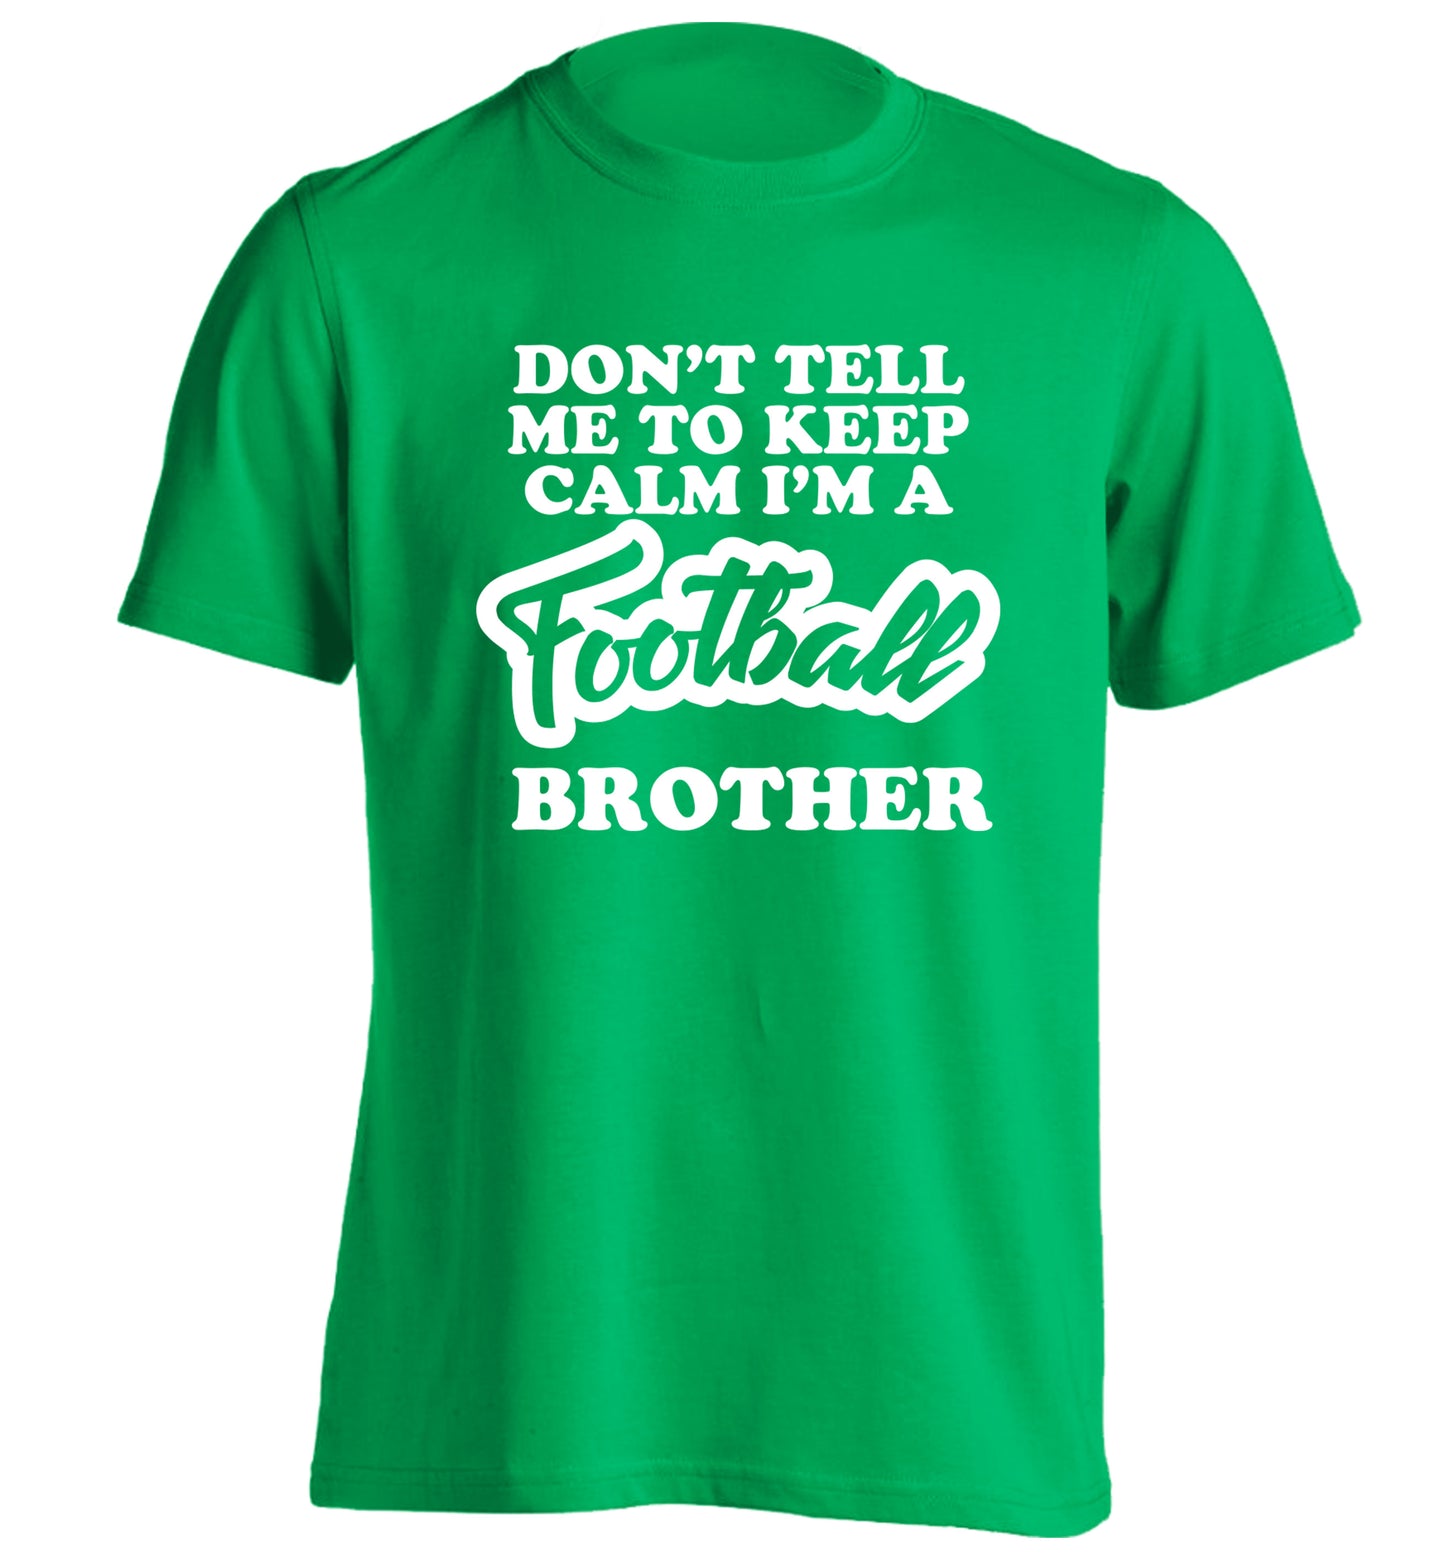 Don't tell me to keep calm I'm a football brother adults unisexgreen Tshirt 2XL